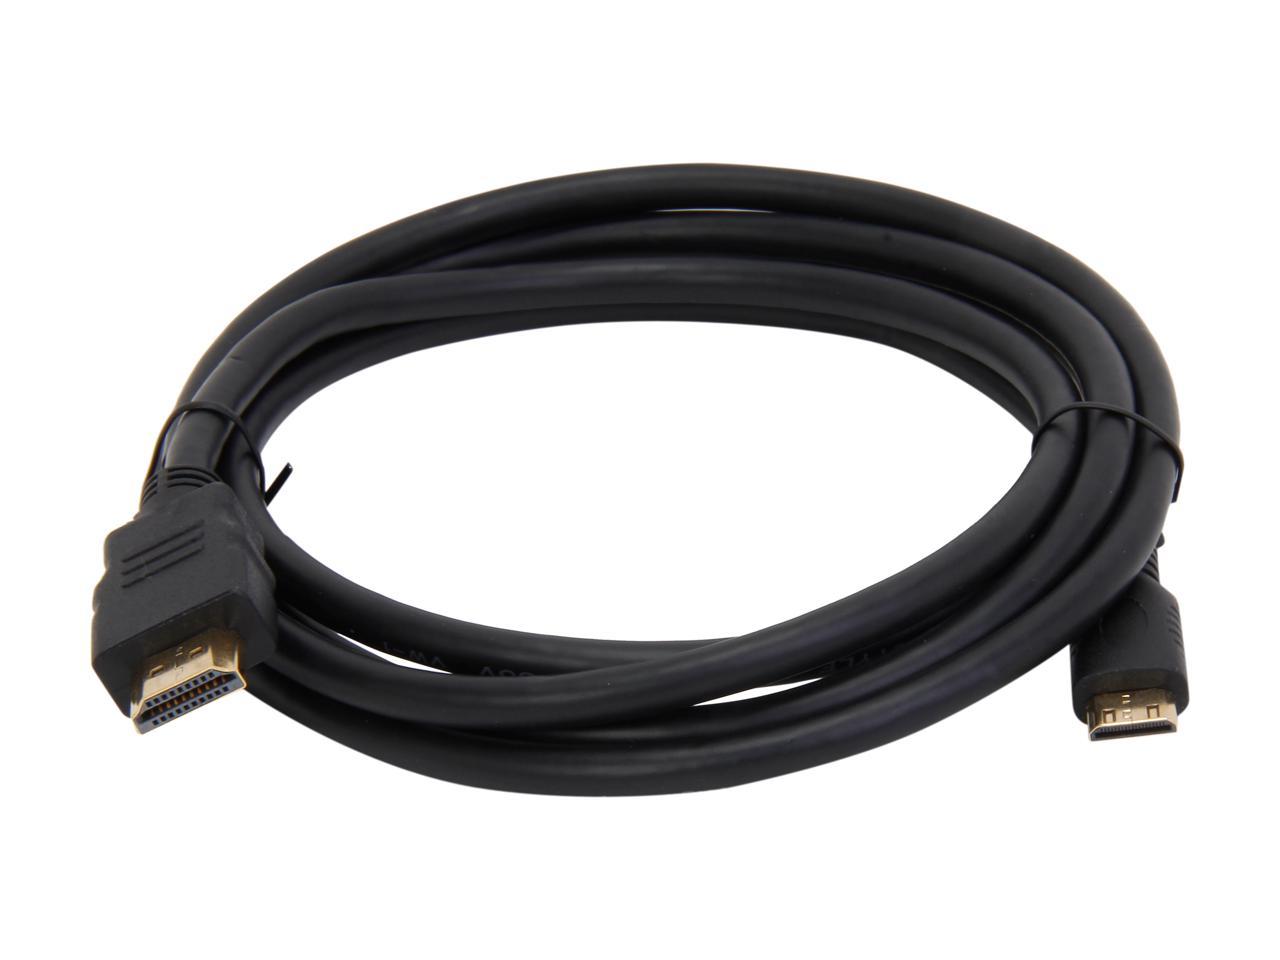 StarTech.com HDMIACMM6 6 ft. Black HDMI to Mini HDMI HDMI to Mini HDMI Cable for Digital Video Male to Male - image 2 of 3